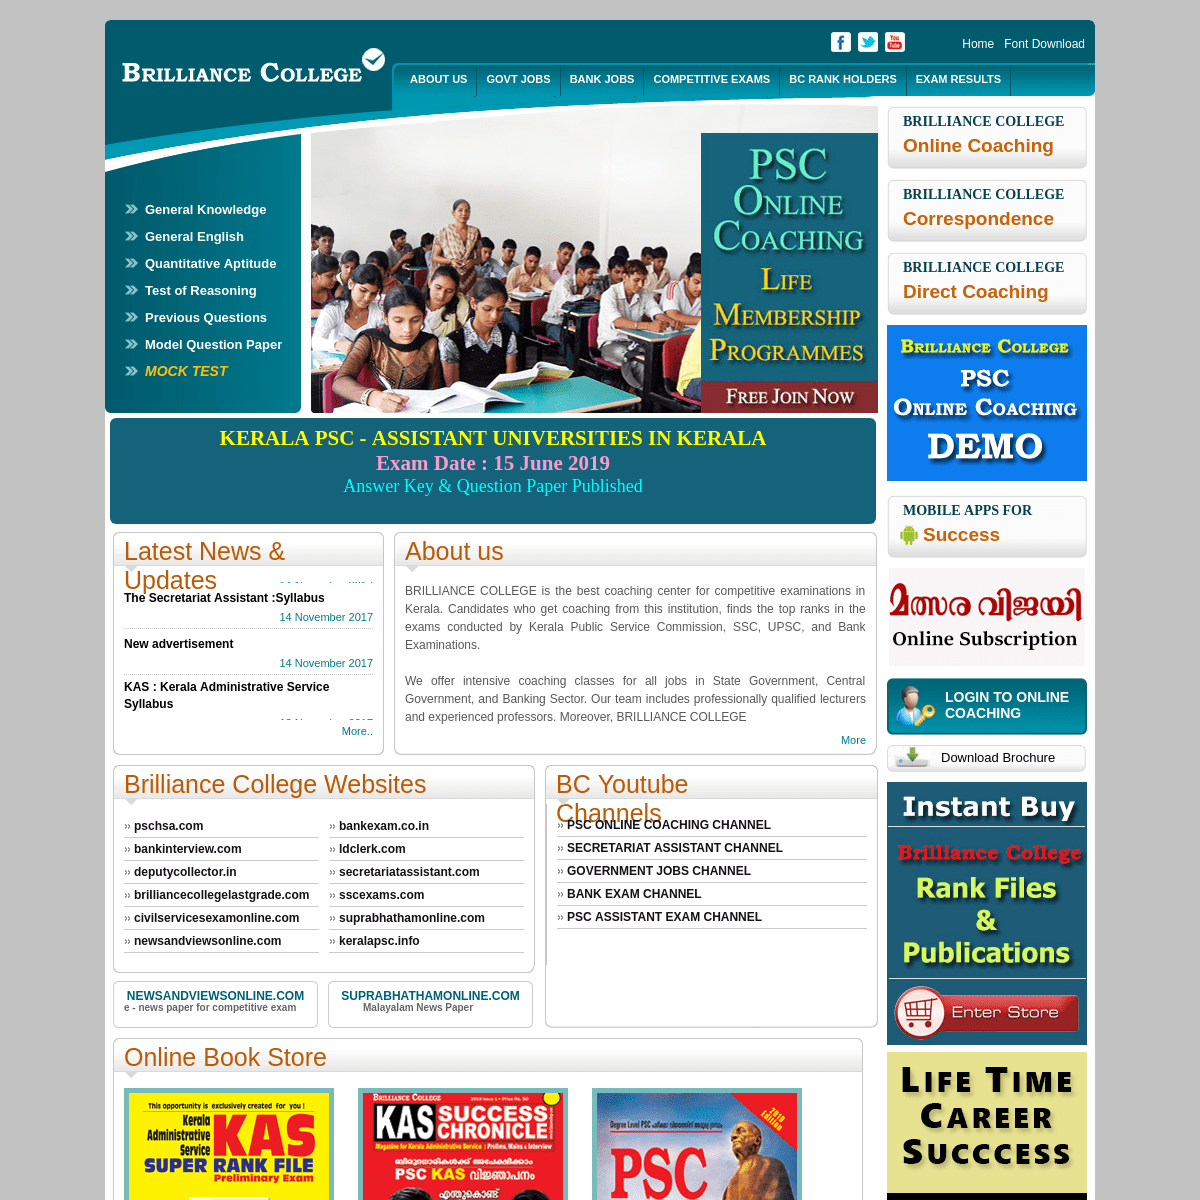 A complete backup of brilliancecollege.com